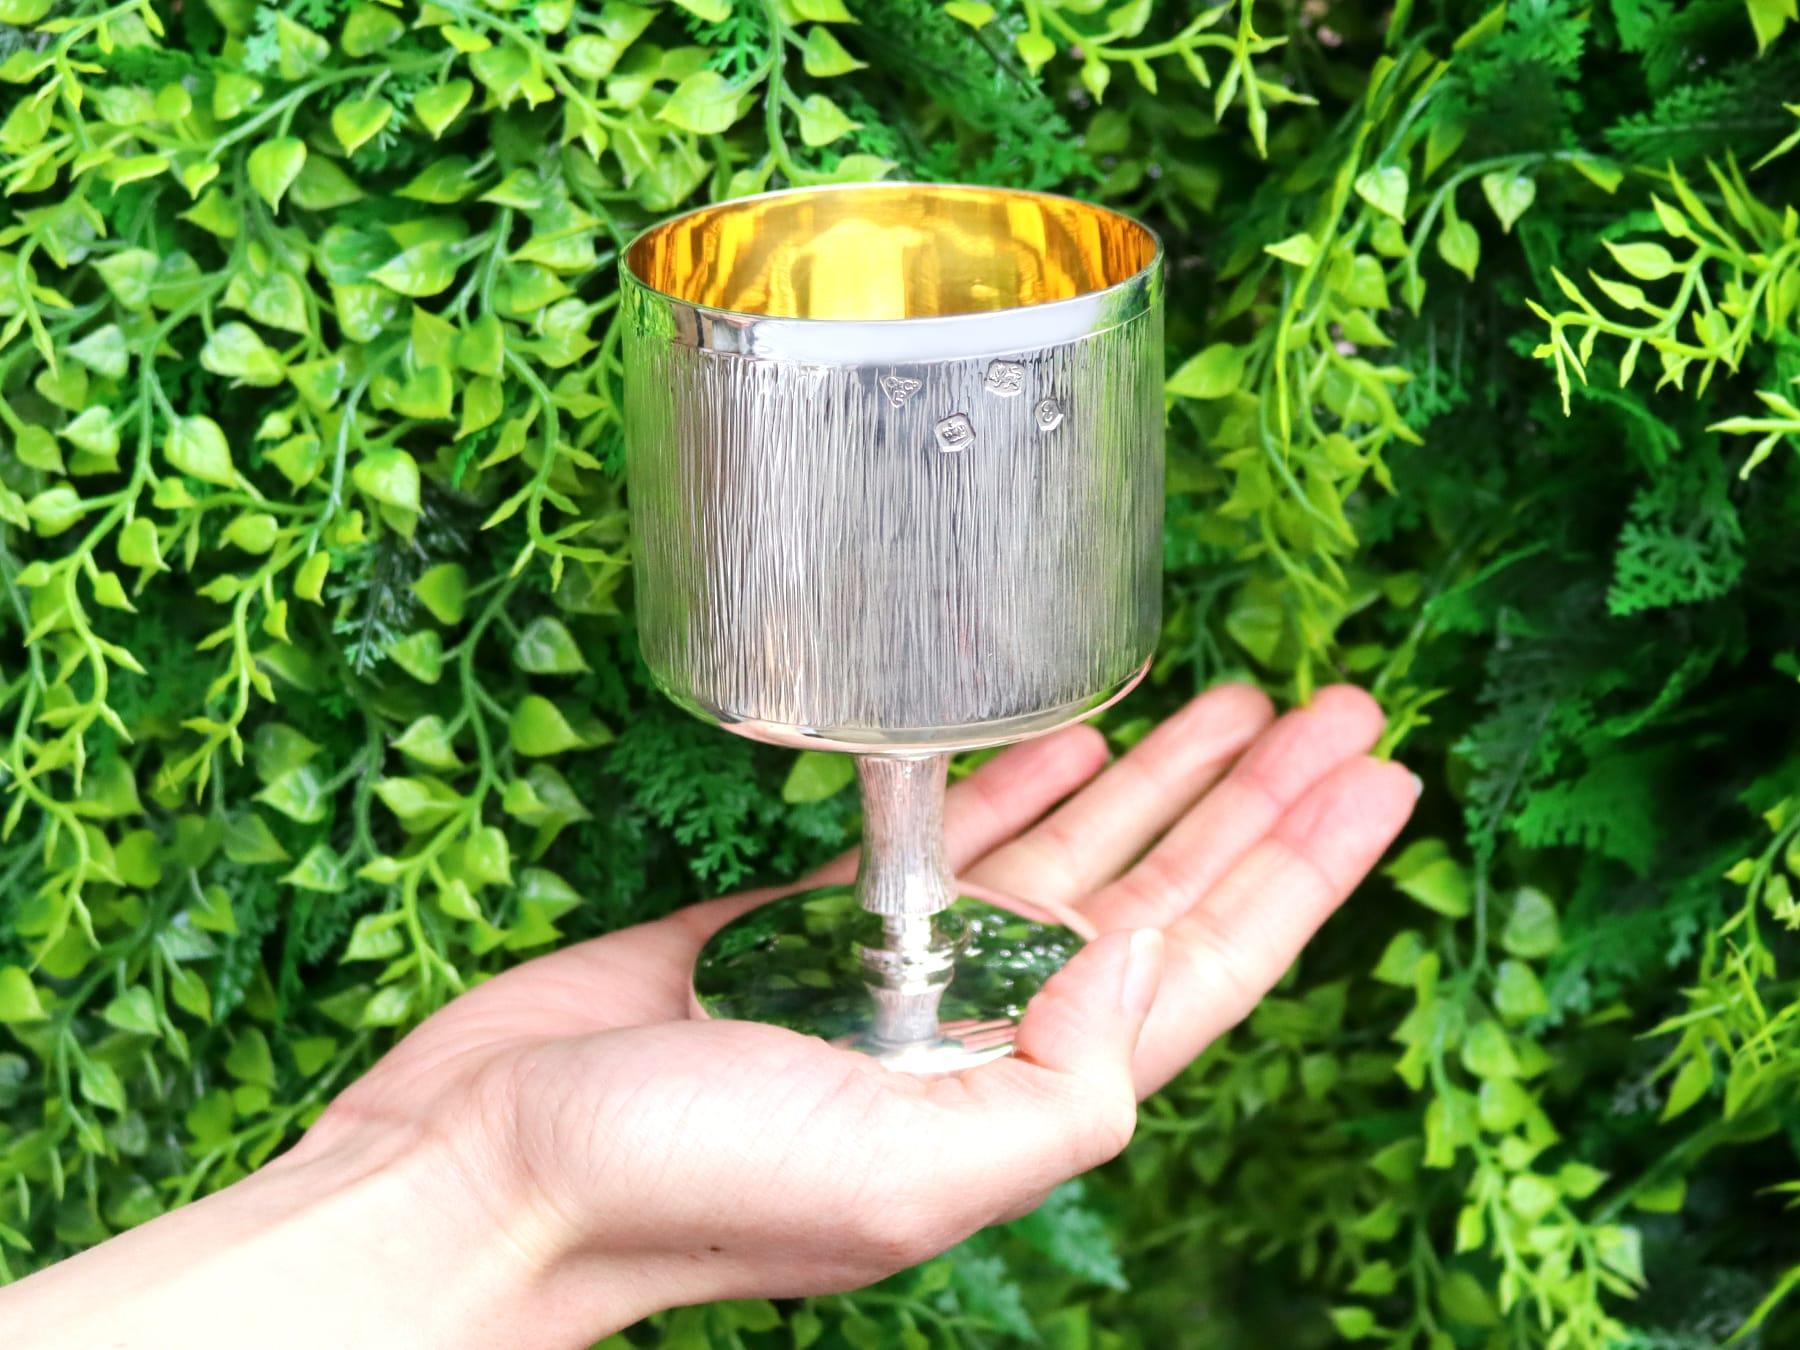 An exceptional, fine and impressive set of 6 vintage Elizabeth II English sterling silver goblets - boxed; an addition to our range of wine and drink related silverware.

These exceptional vintage sterling silver goblets have a cylindrical form